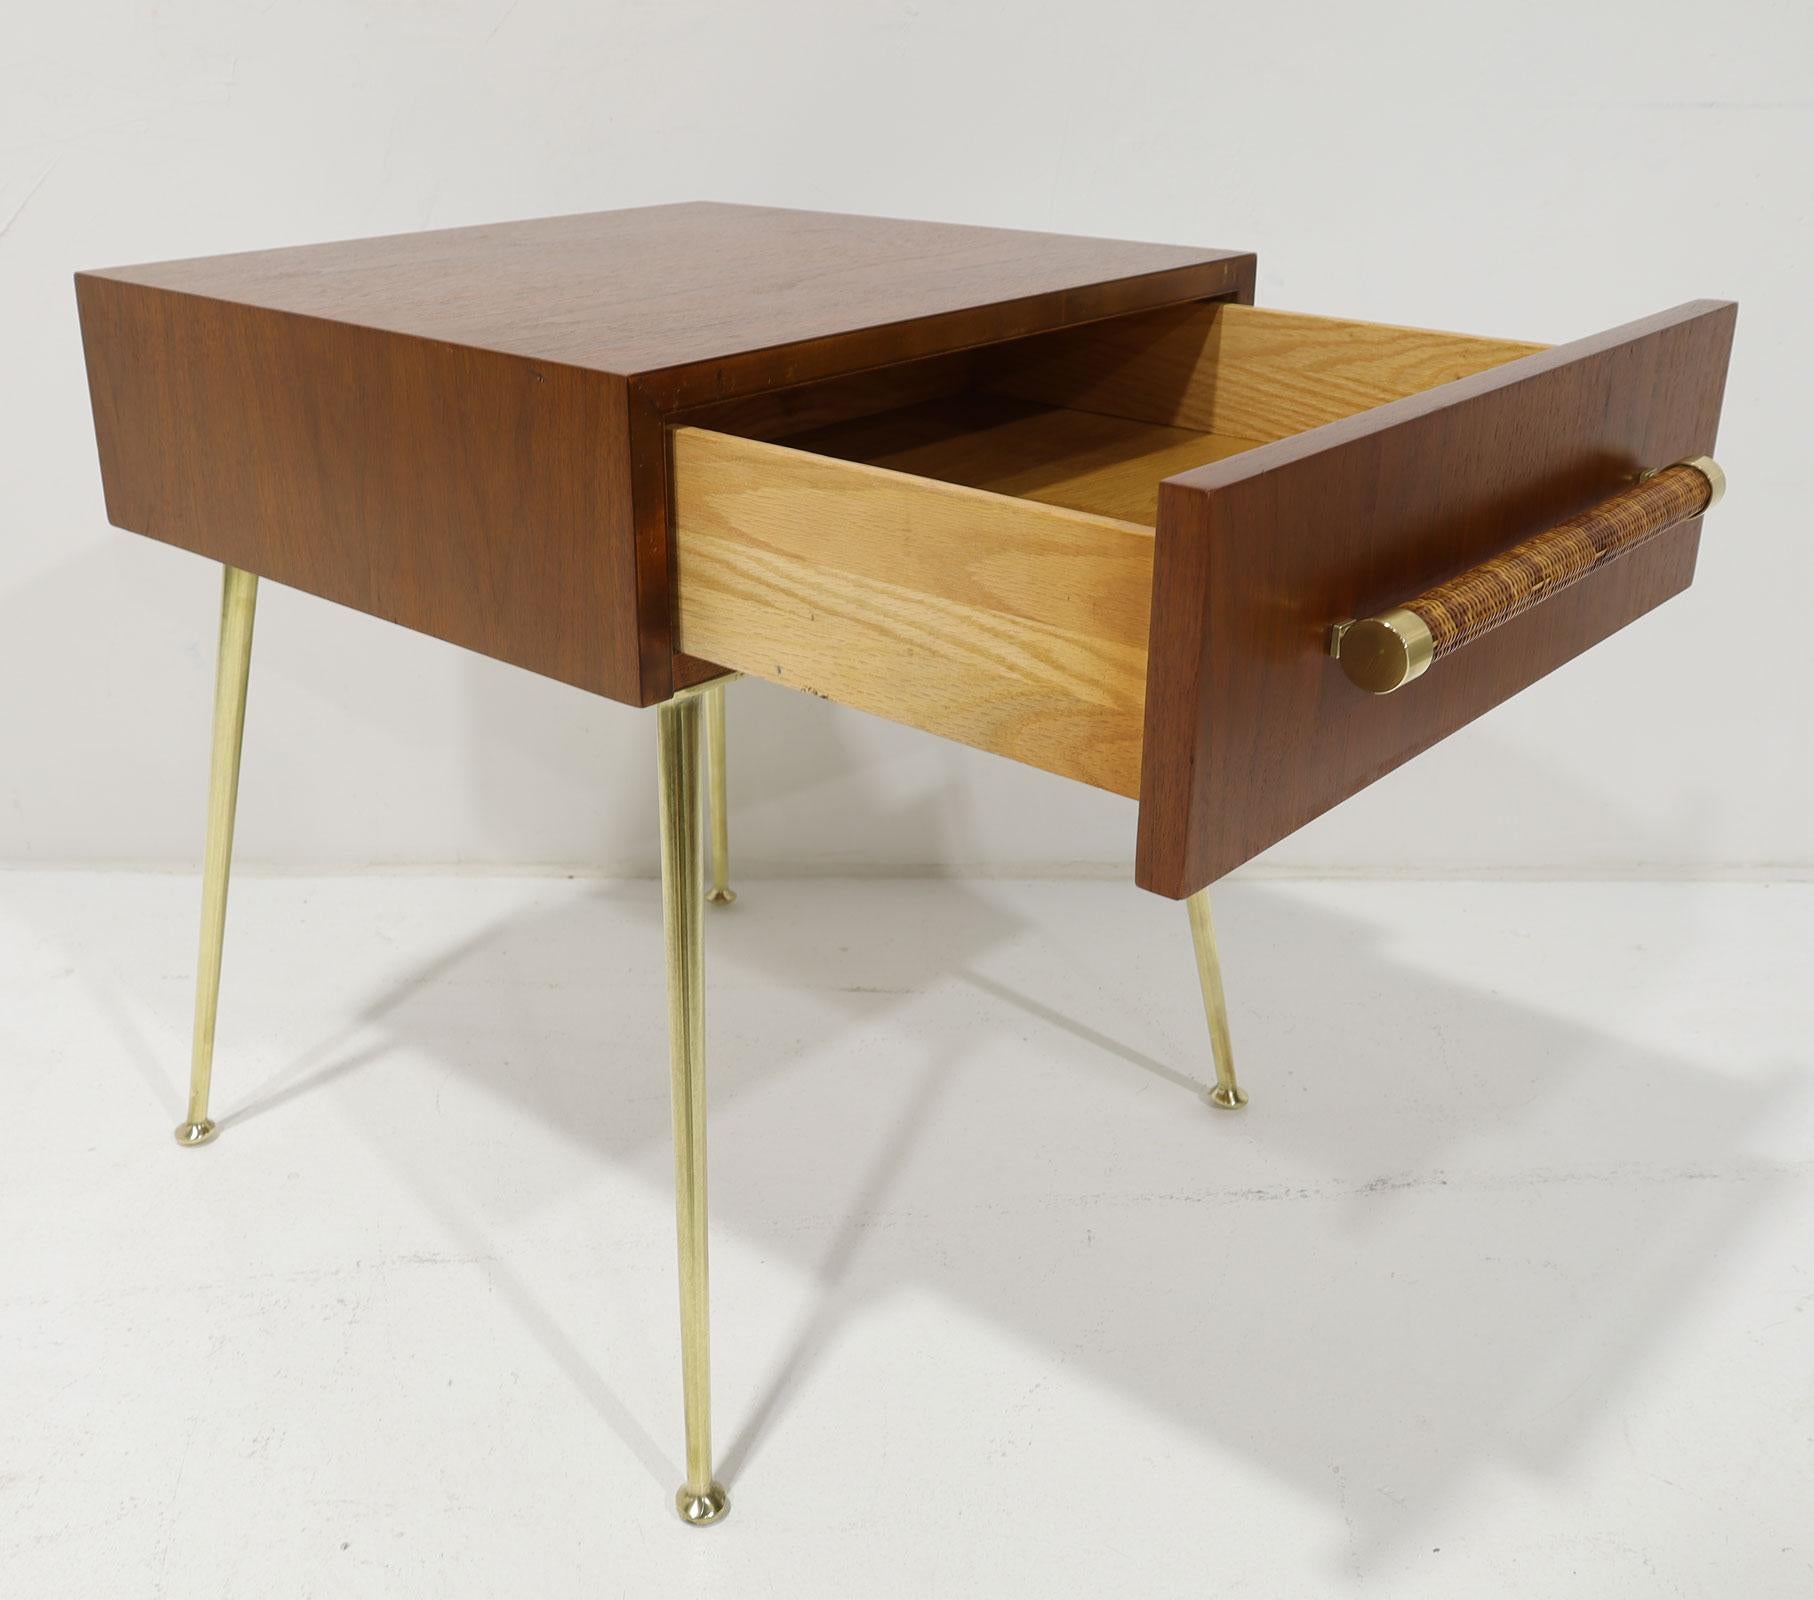 20th Century Robsjohn-Gibbings for Widdicomb Side Table in Walnut, Brass and Cane, 1950s For Sale